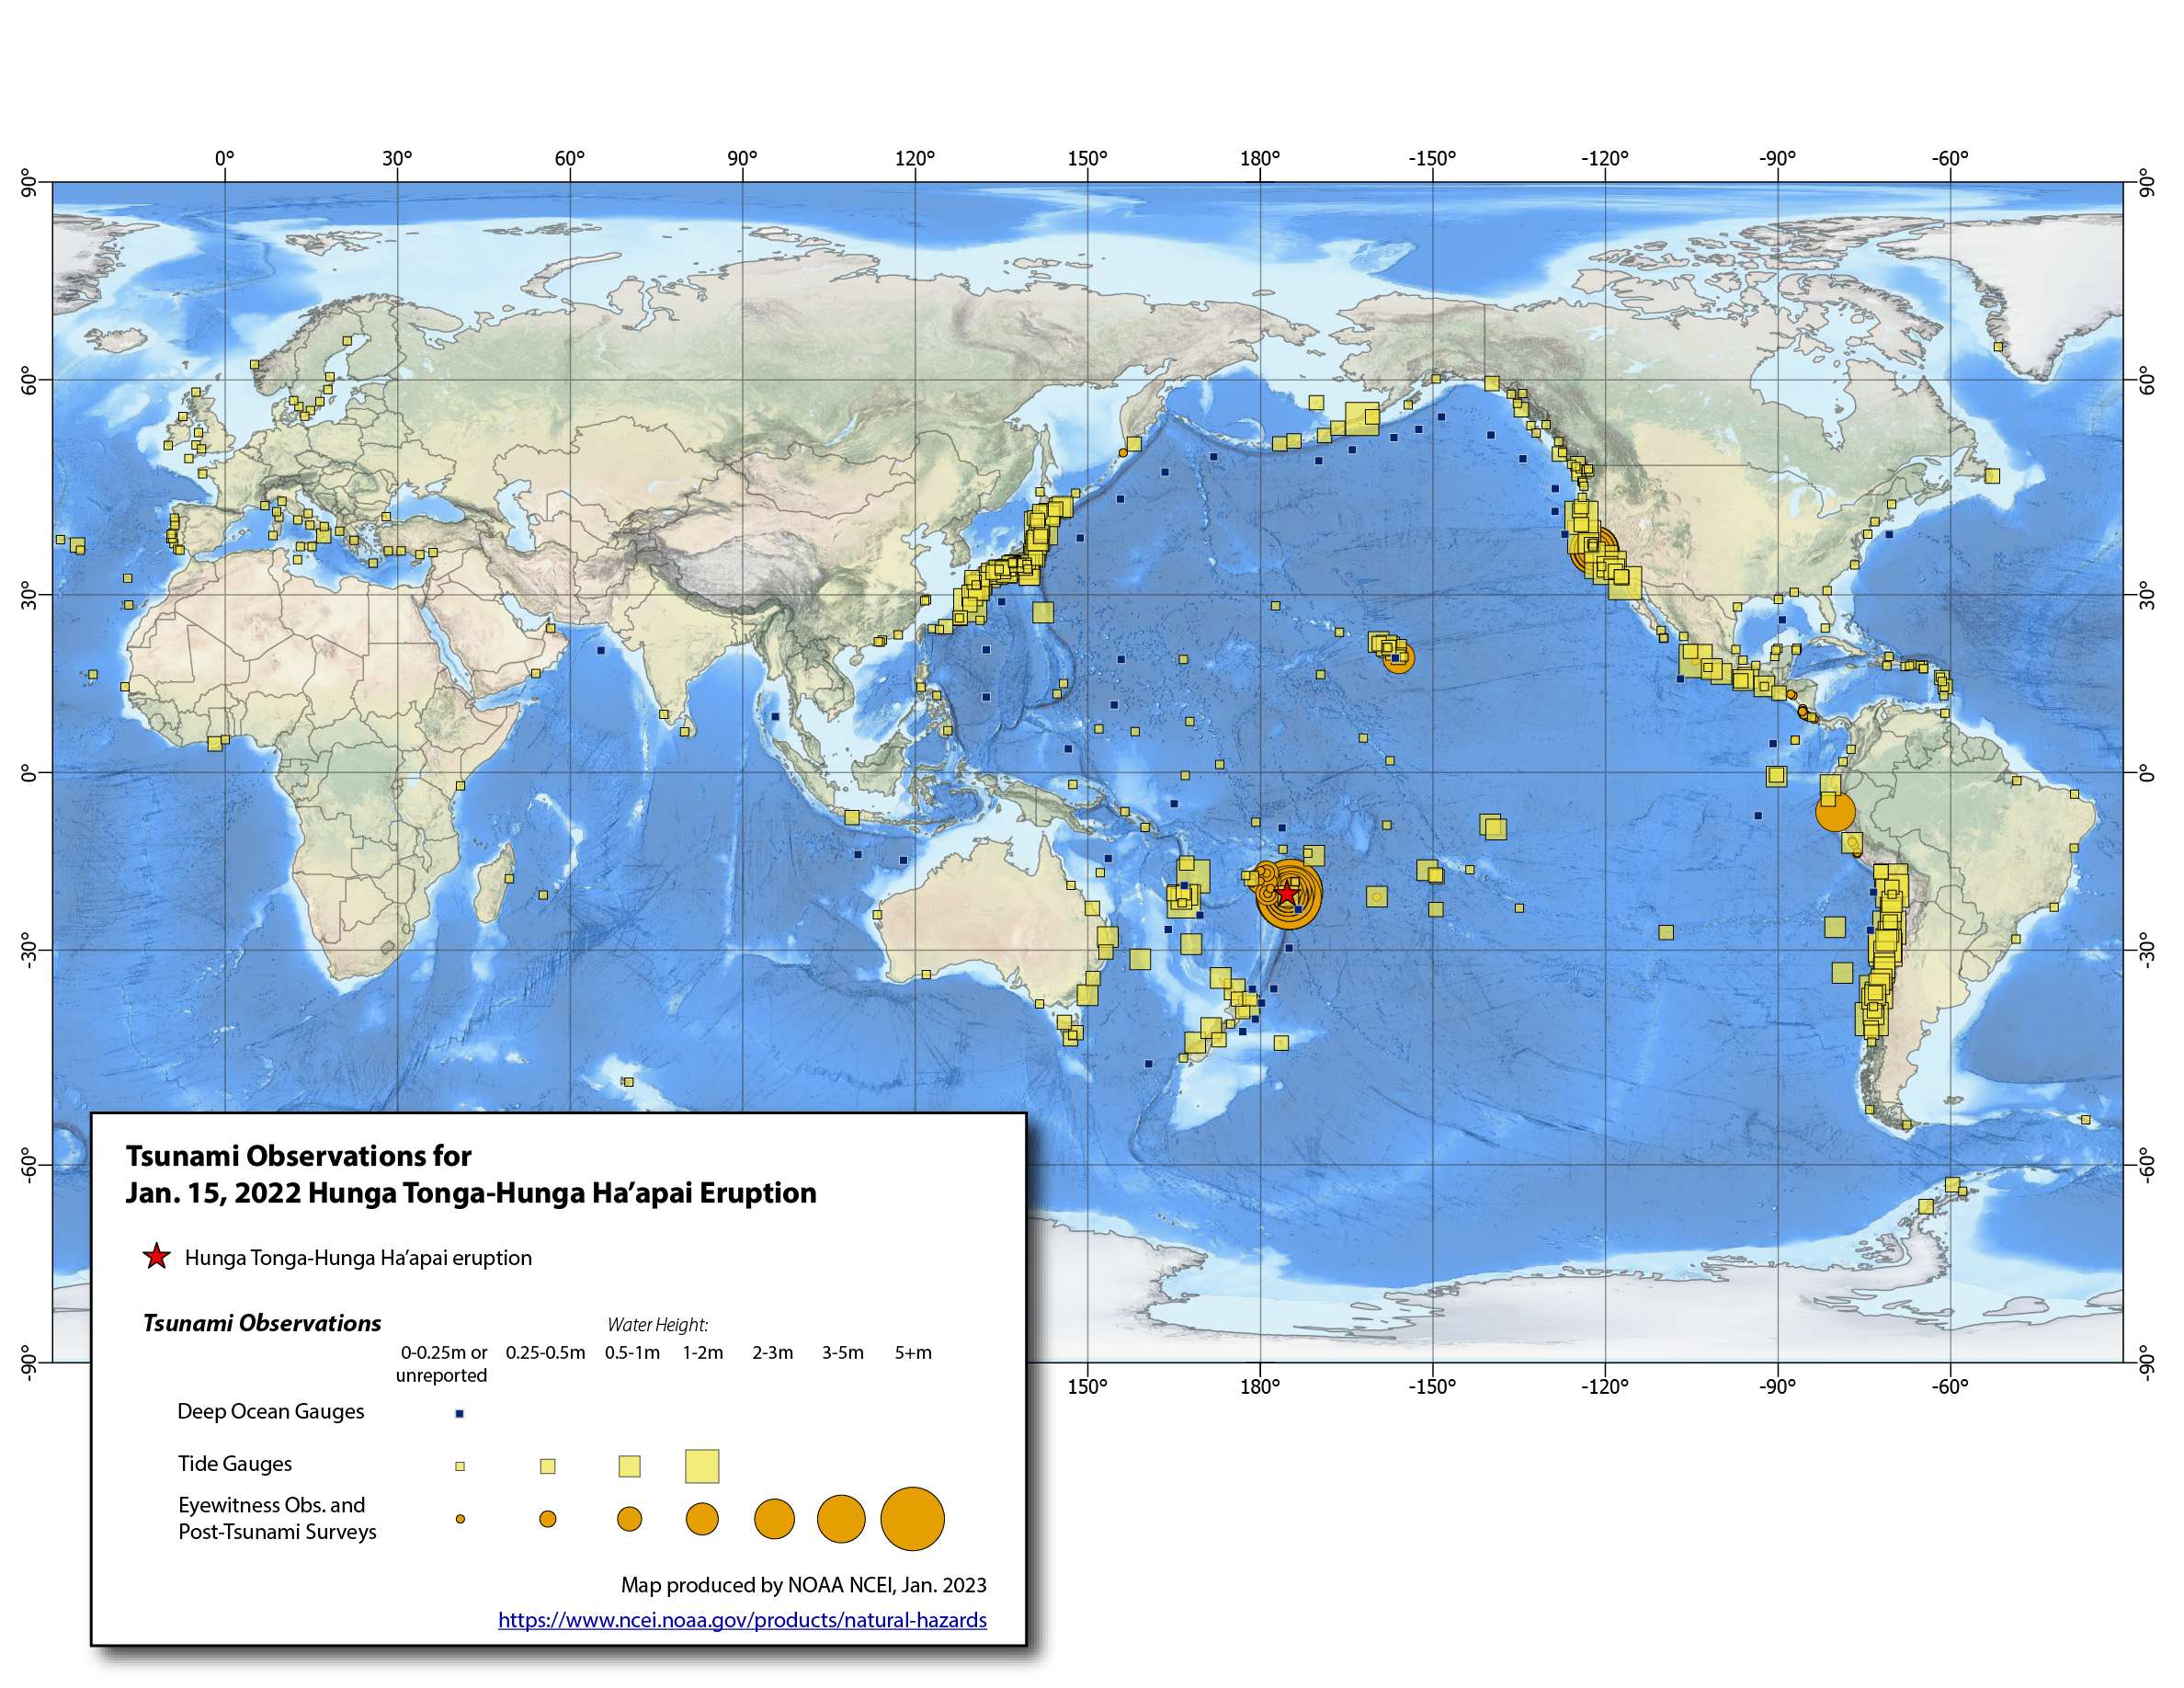 Tsunami Time Travel Map for the 15 January 2022 Tonga Tsunami. Select image for a larger view